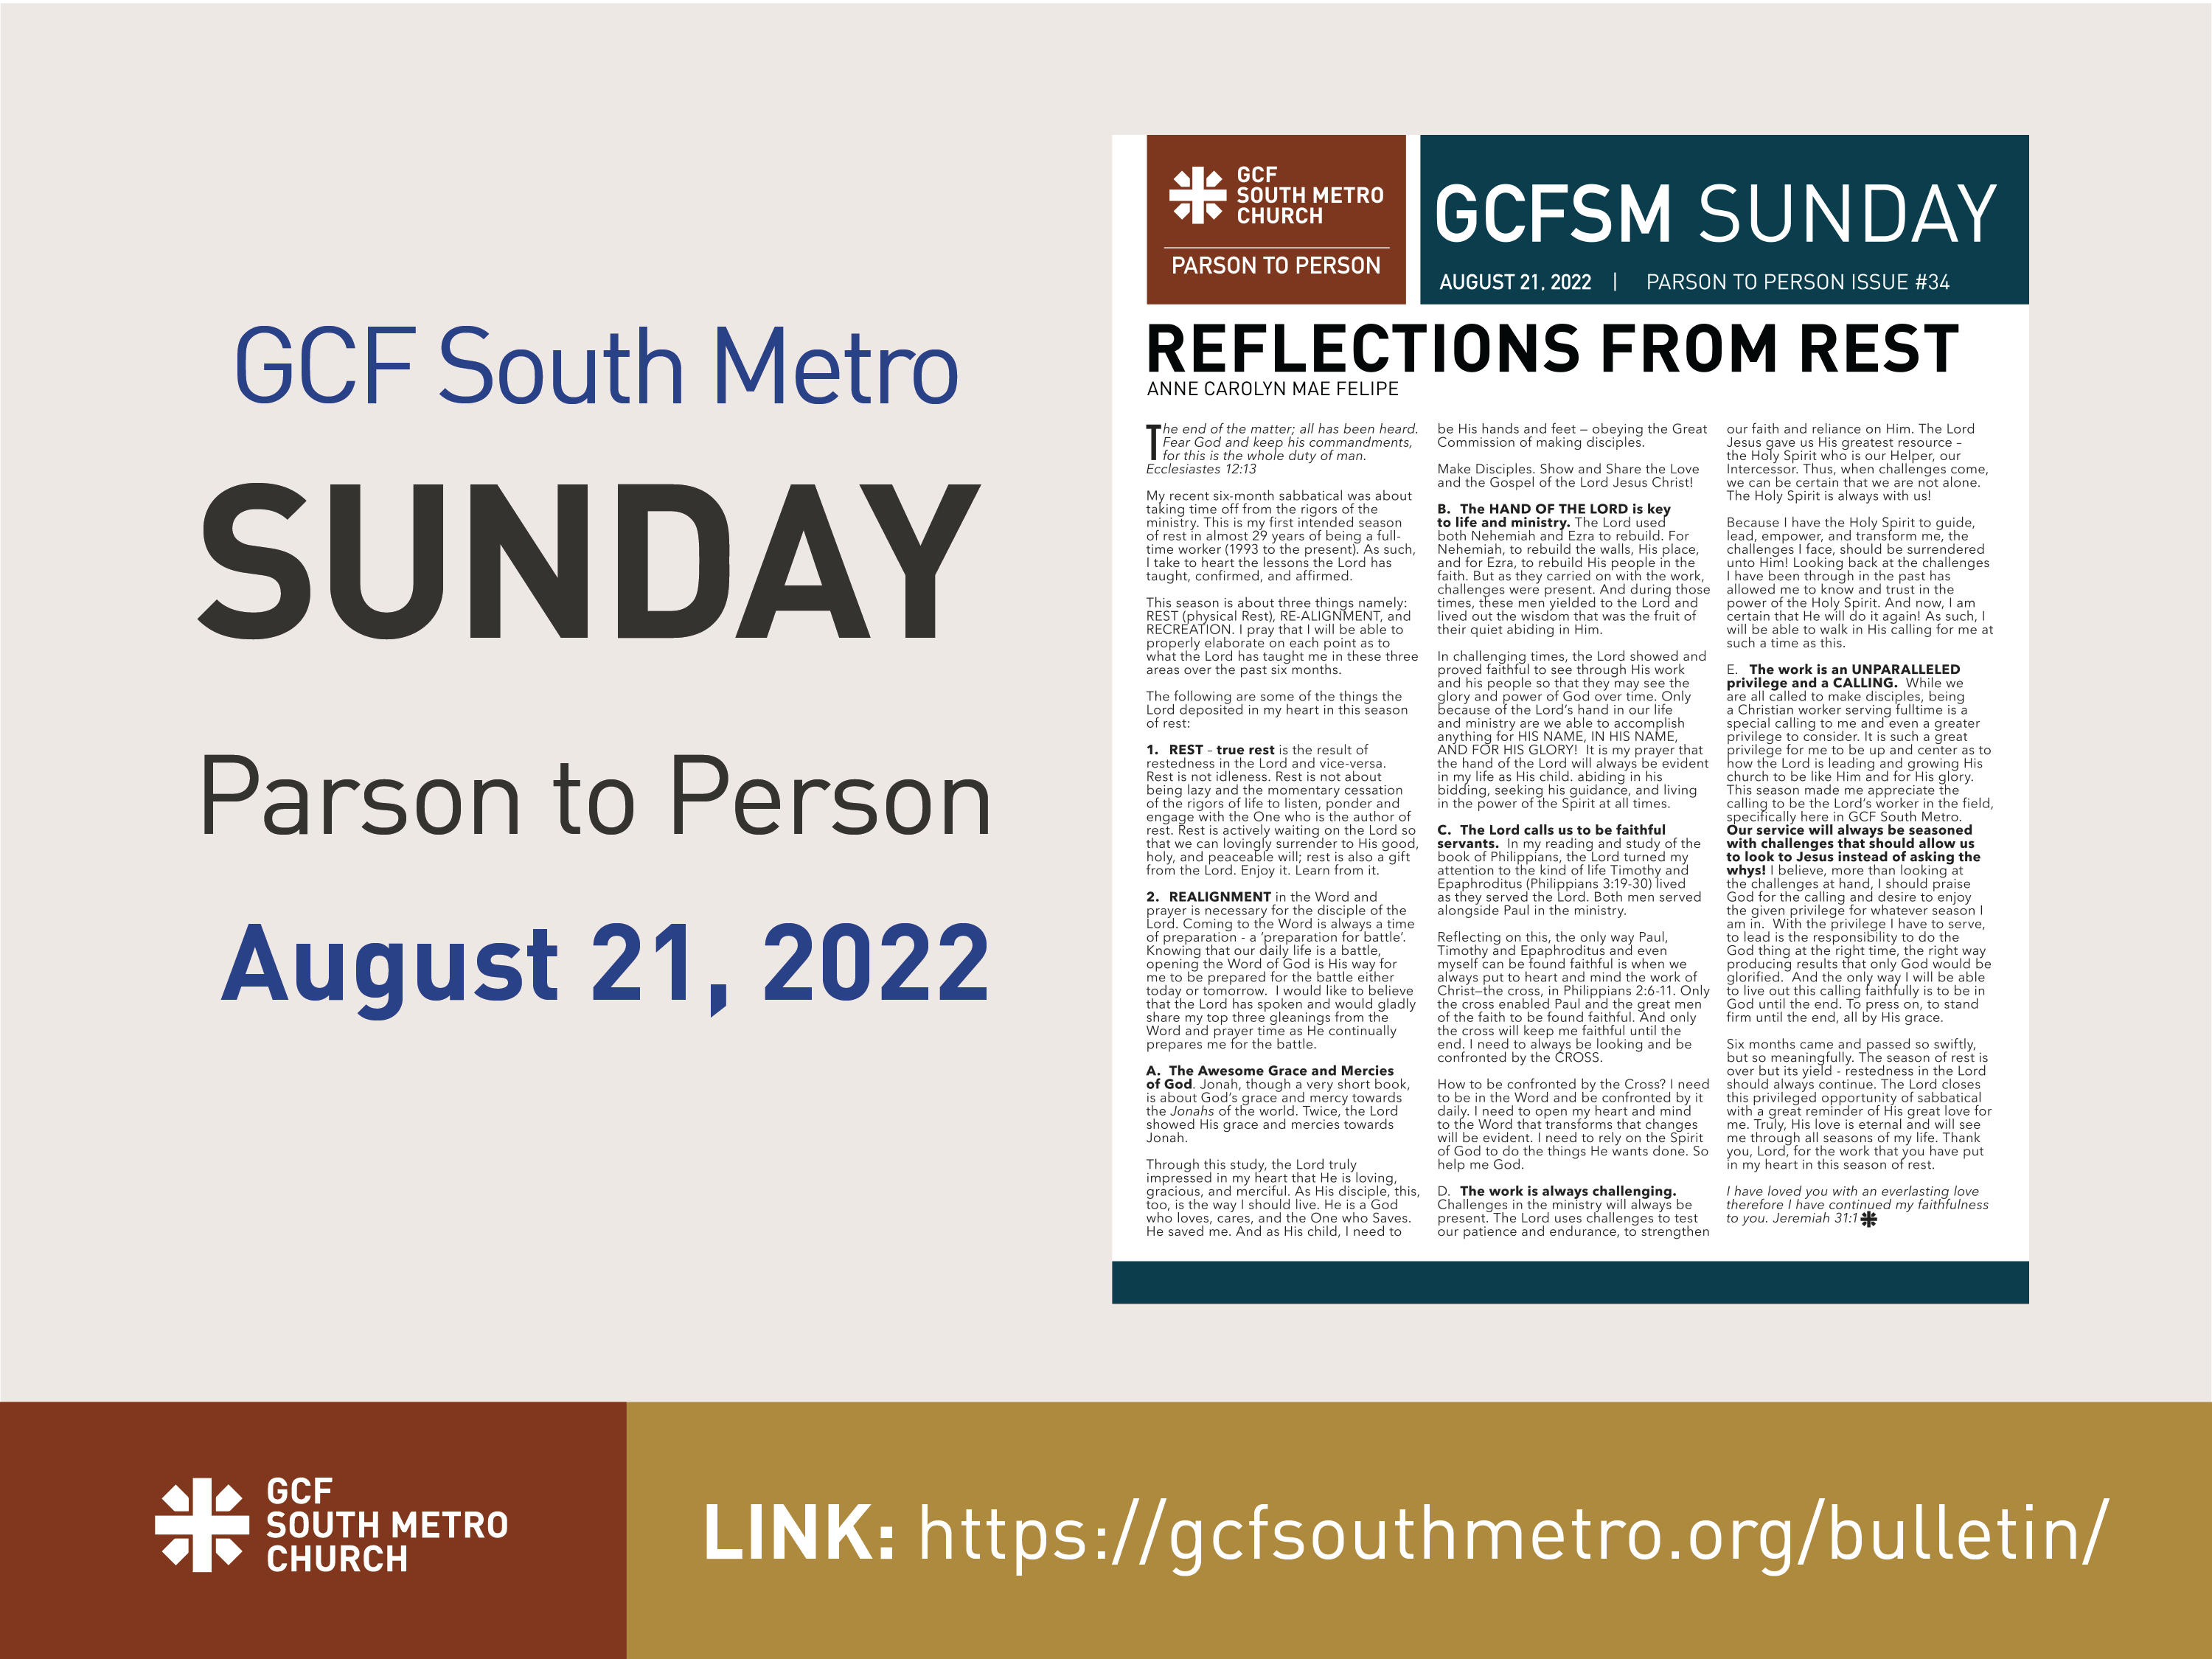 Sunday Bulletin – Parson to Person, August 21, 2022